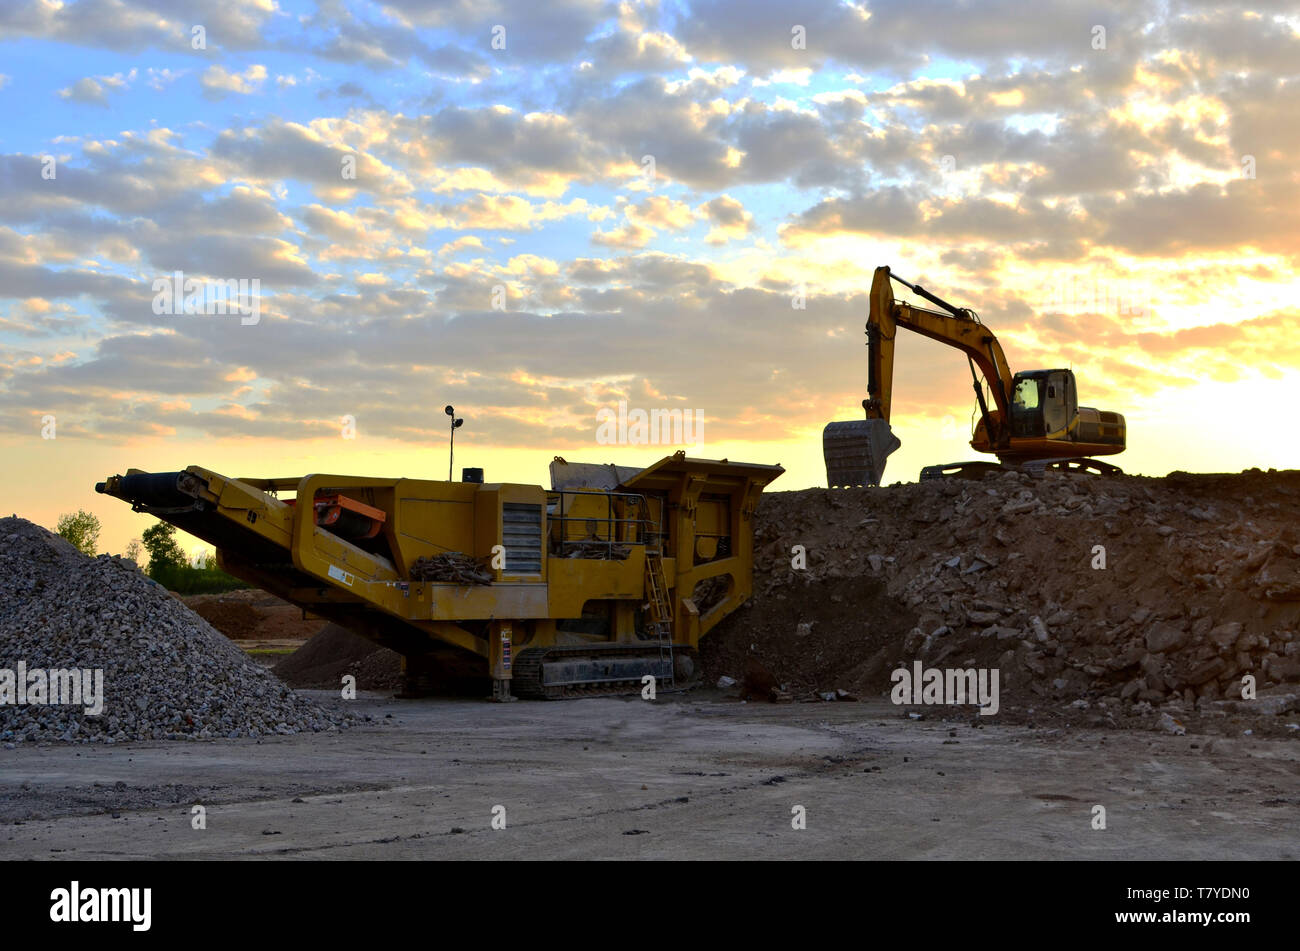 https://c8.alamy.com/comp/T7YDN0/mobile-stone-crusher-machine-by-the-construction-site-or-mining-quarry-for-crushing-old-concrete-slabs-into-gravel-and-subsequent-cement-production-T7YDN0.jpg